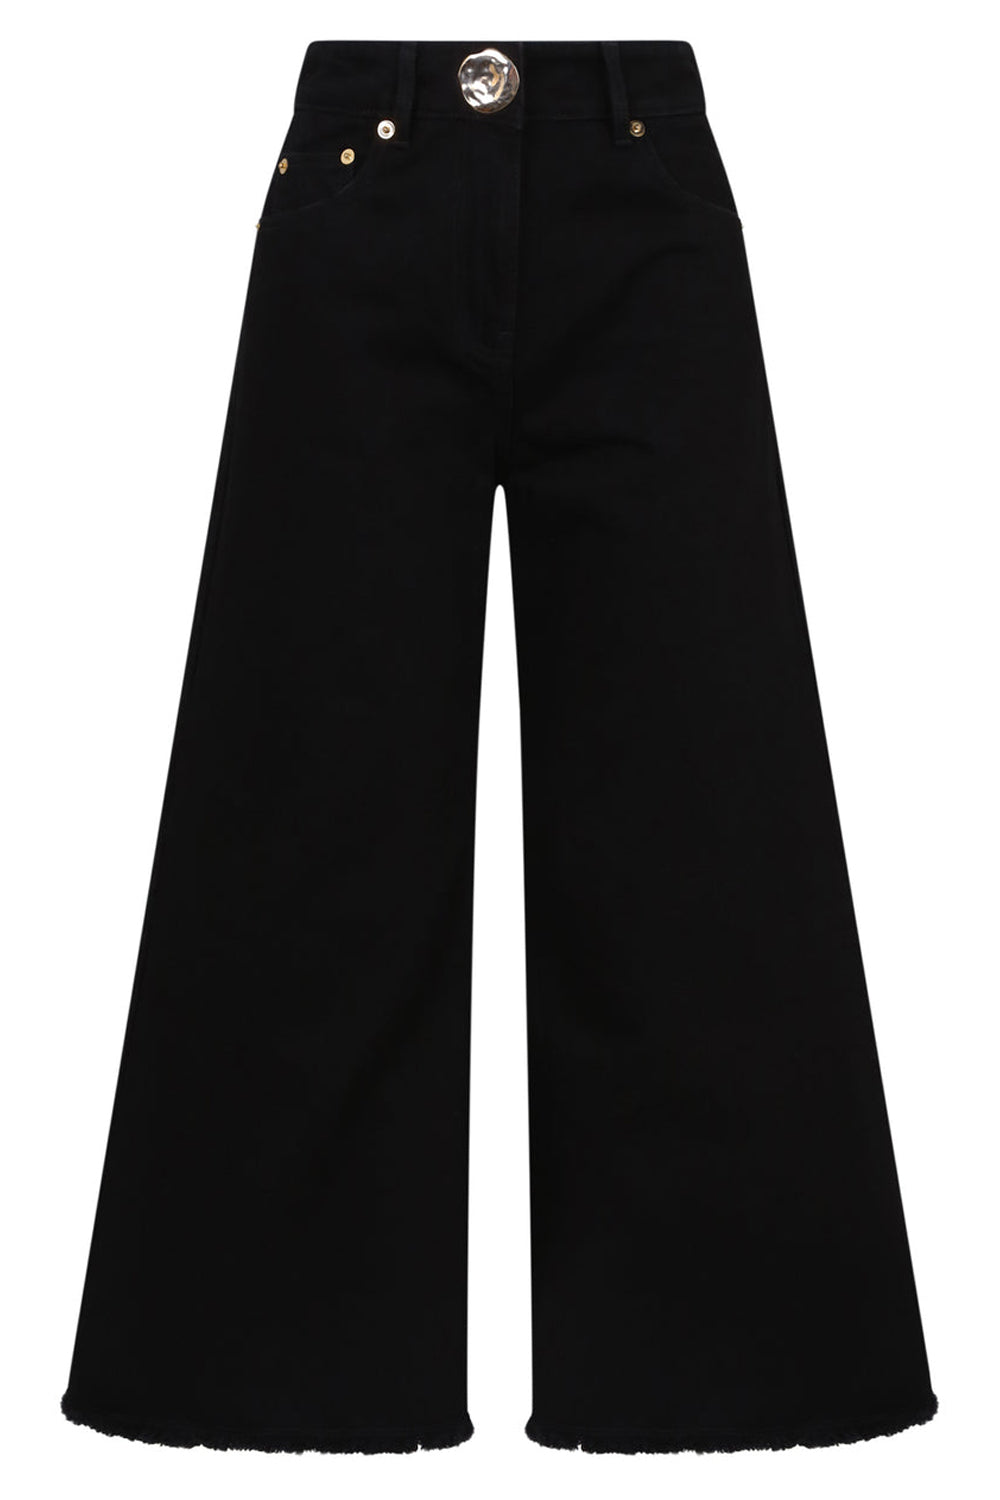 MOTHER OF PEARL PANTS CROPPED WIDE LEG DENIM TROUSERS BLACK